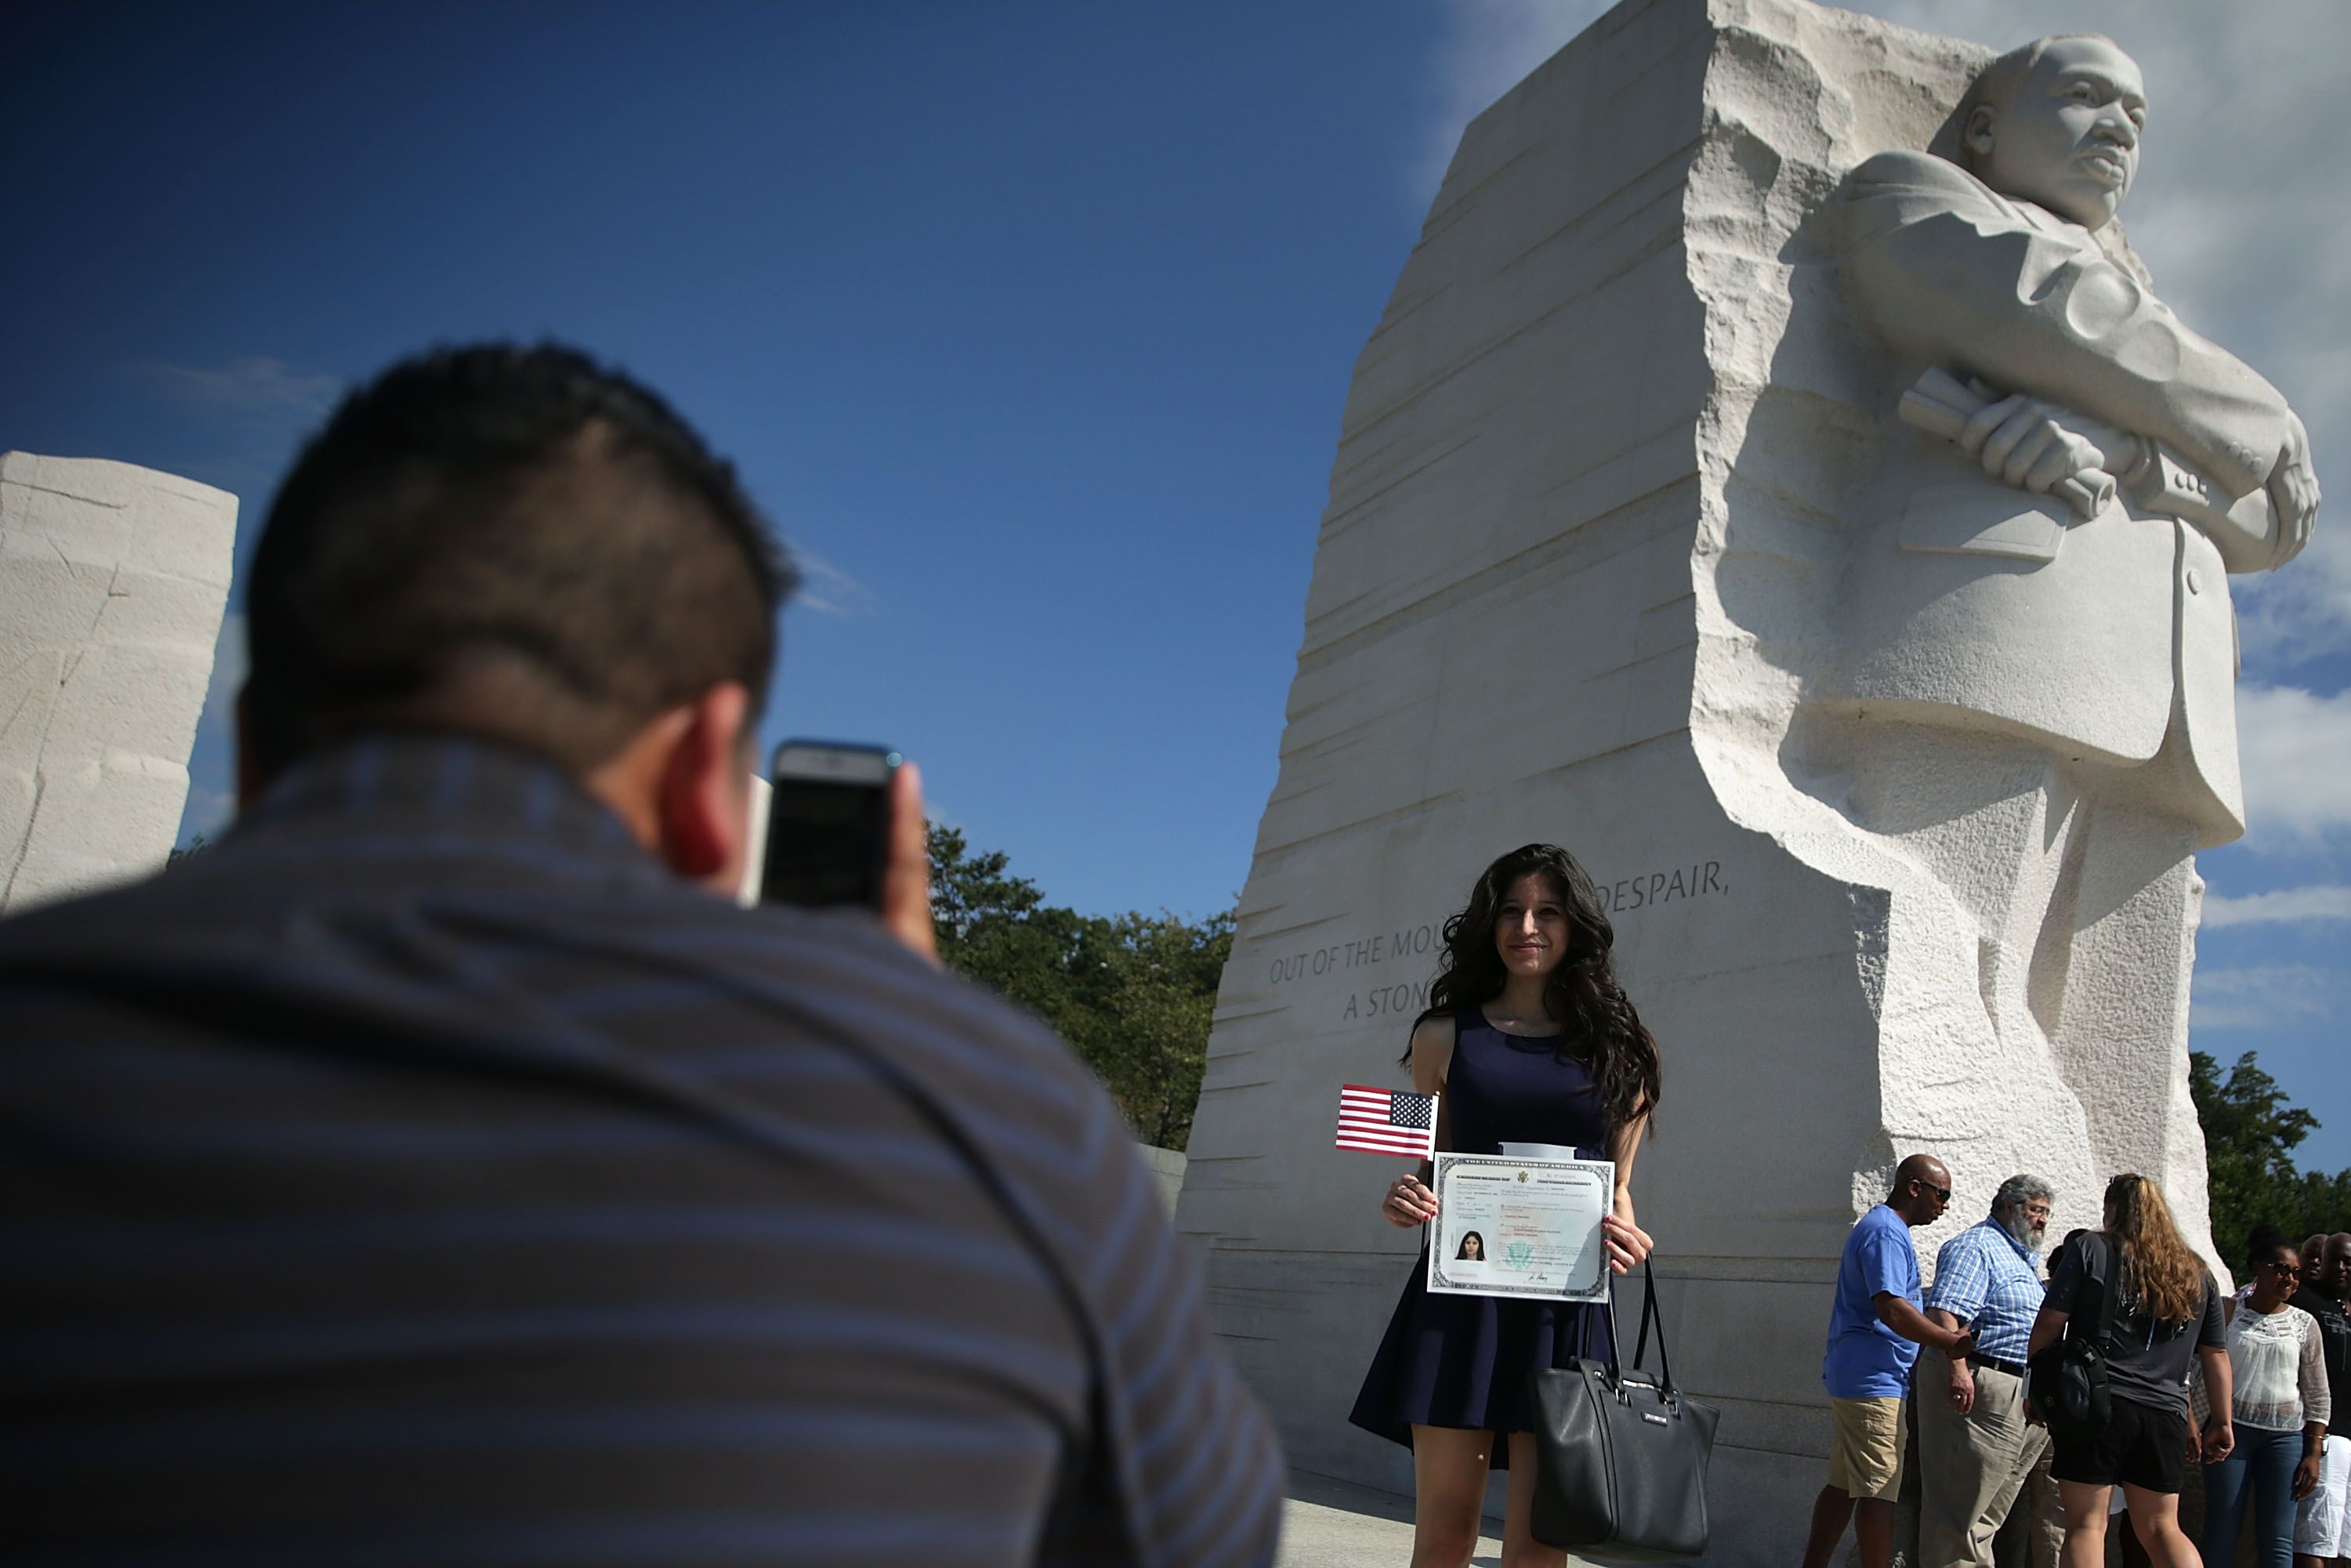 Judith Escobar of Lorton, Virginia, who was originally from El Salvador, poses with her certificate after a special naturalization ceremony at Martin Luther King, Jr. Memorial n Washington.